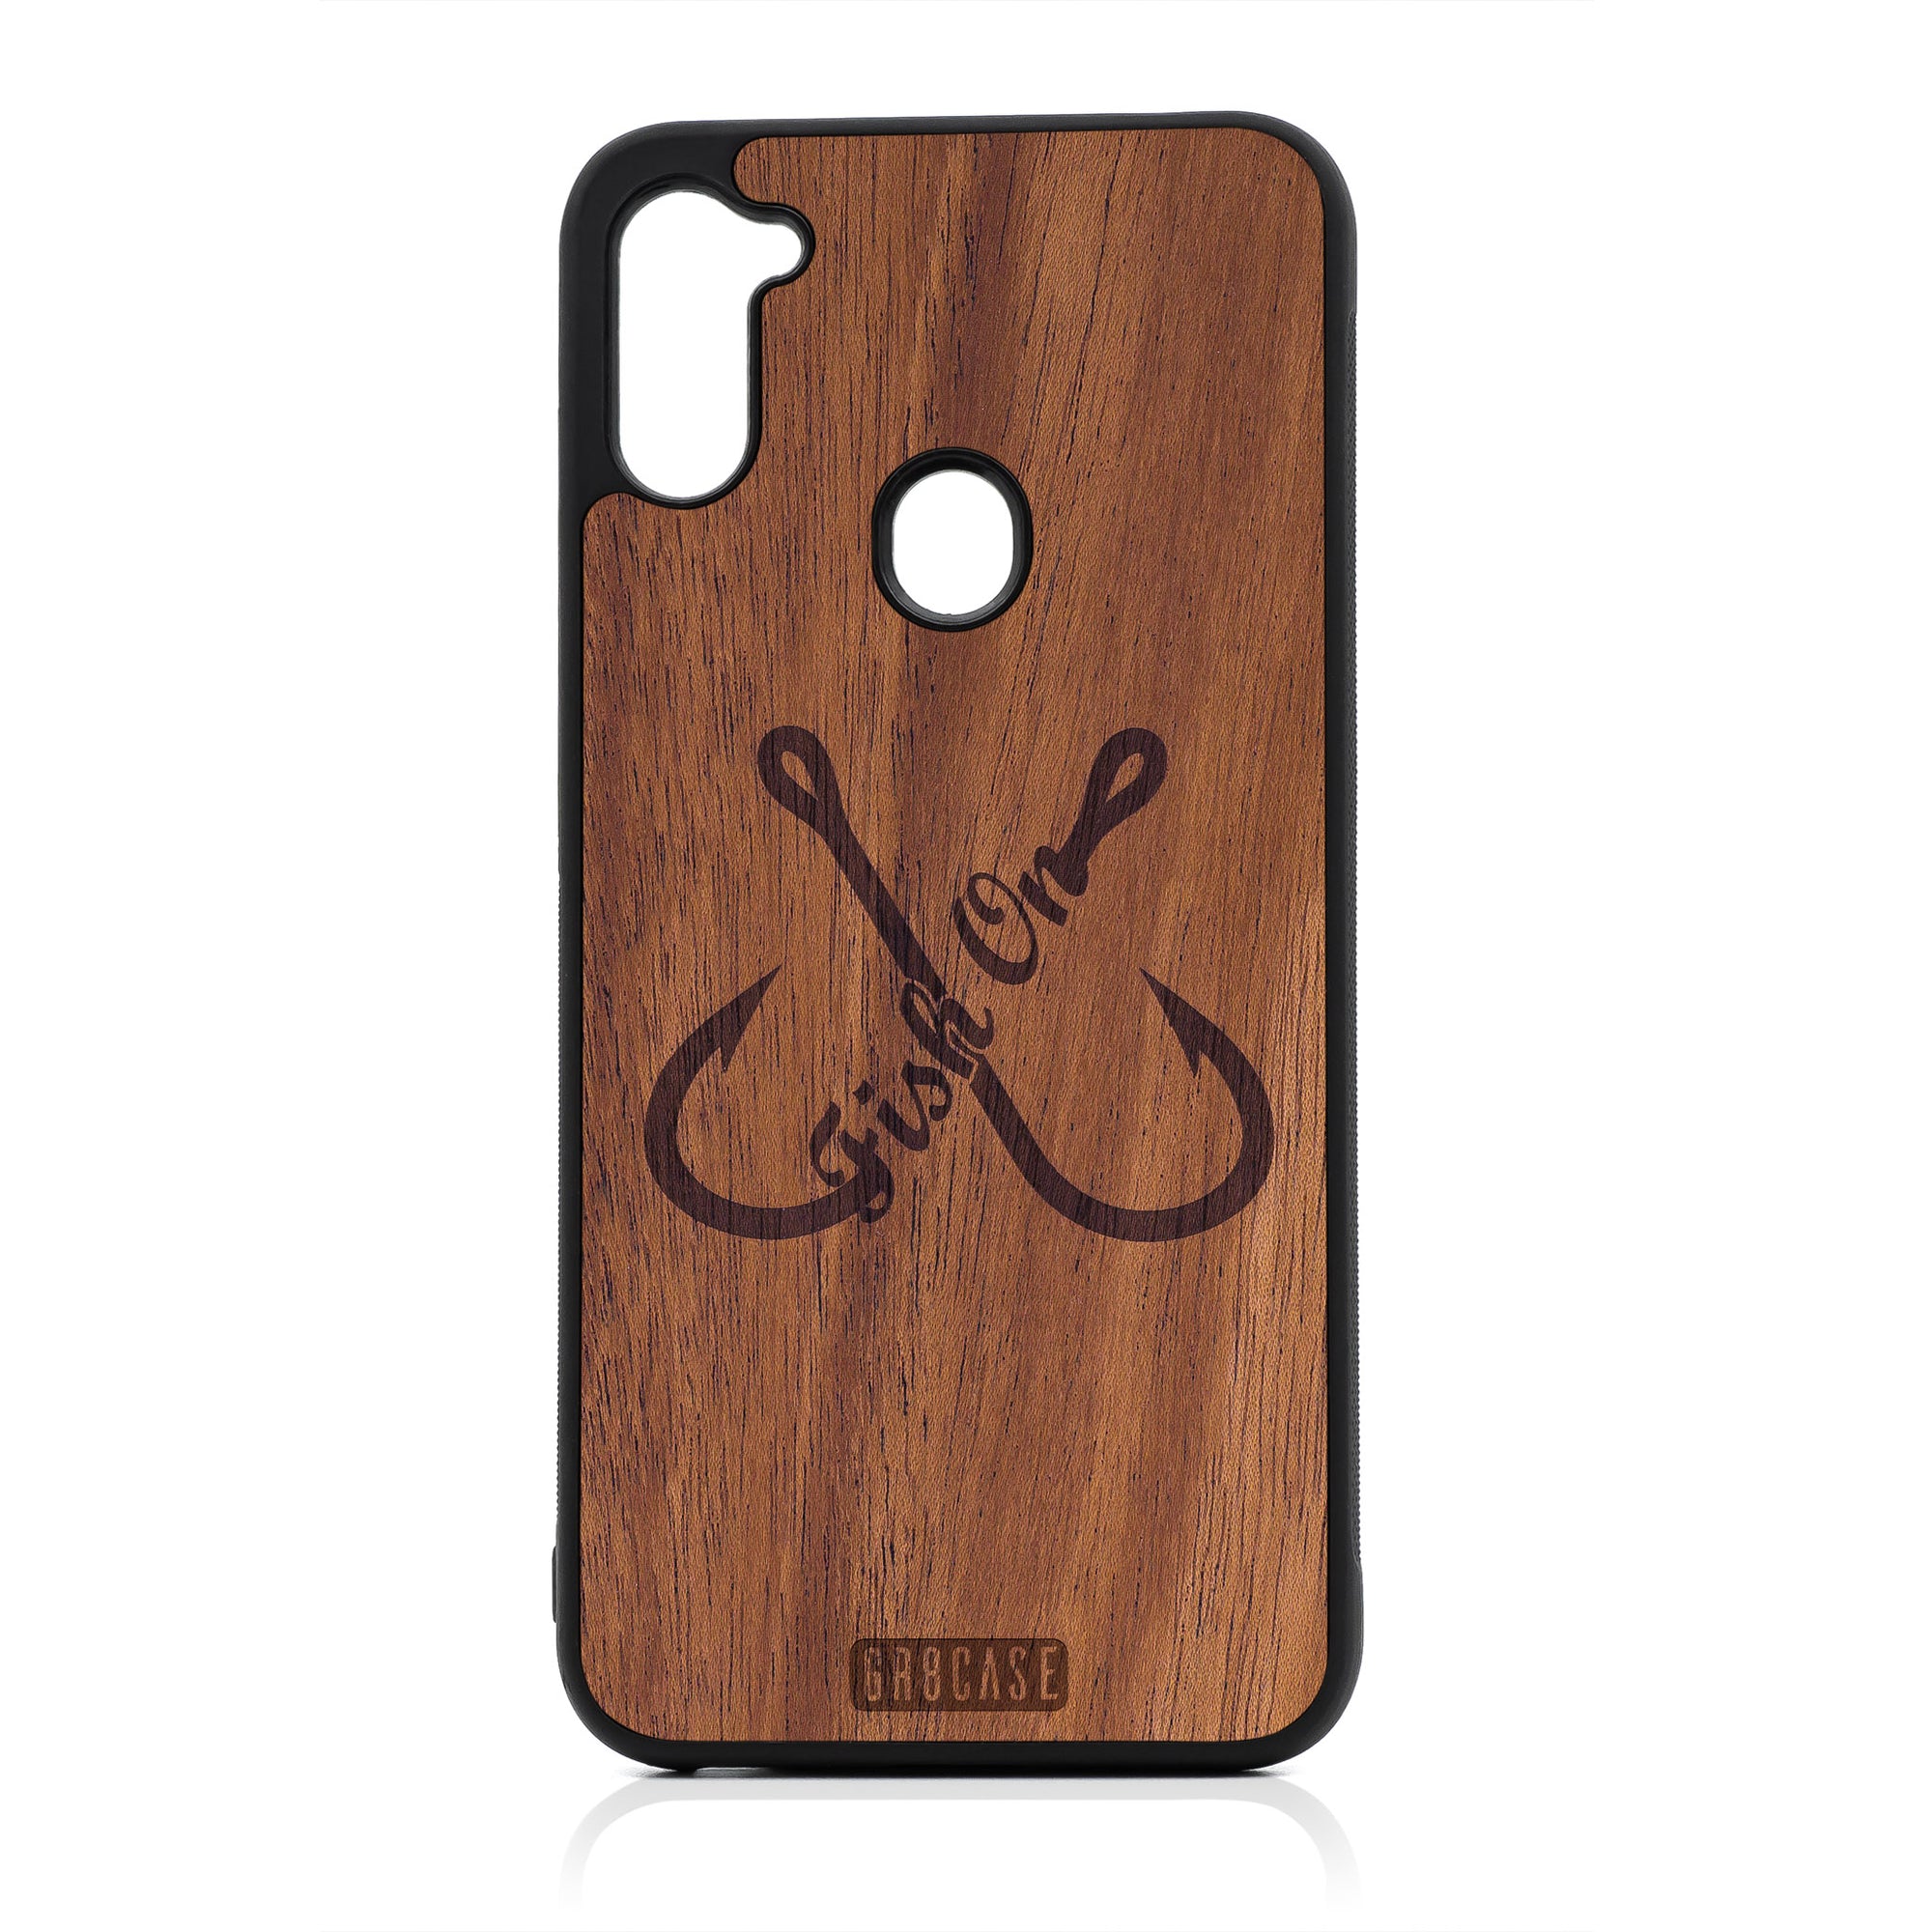 Fish On (Fish Hooks) Design Wood Case For Samsung Galaxy A11